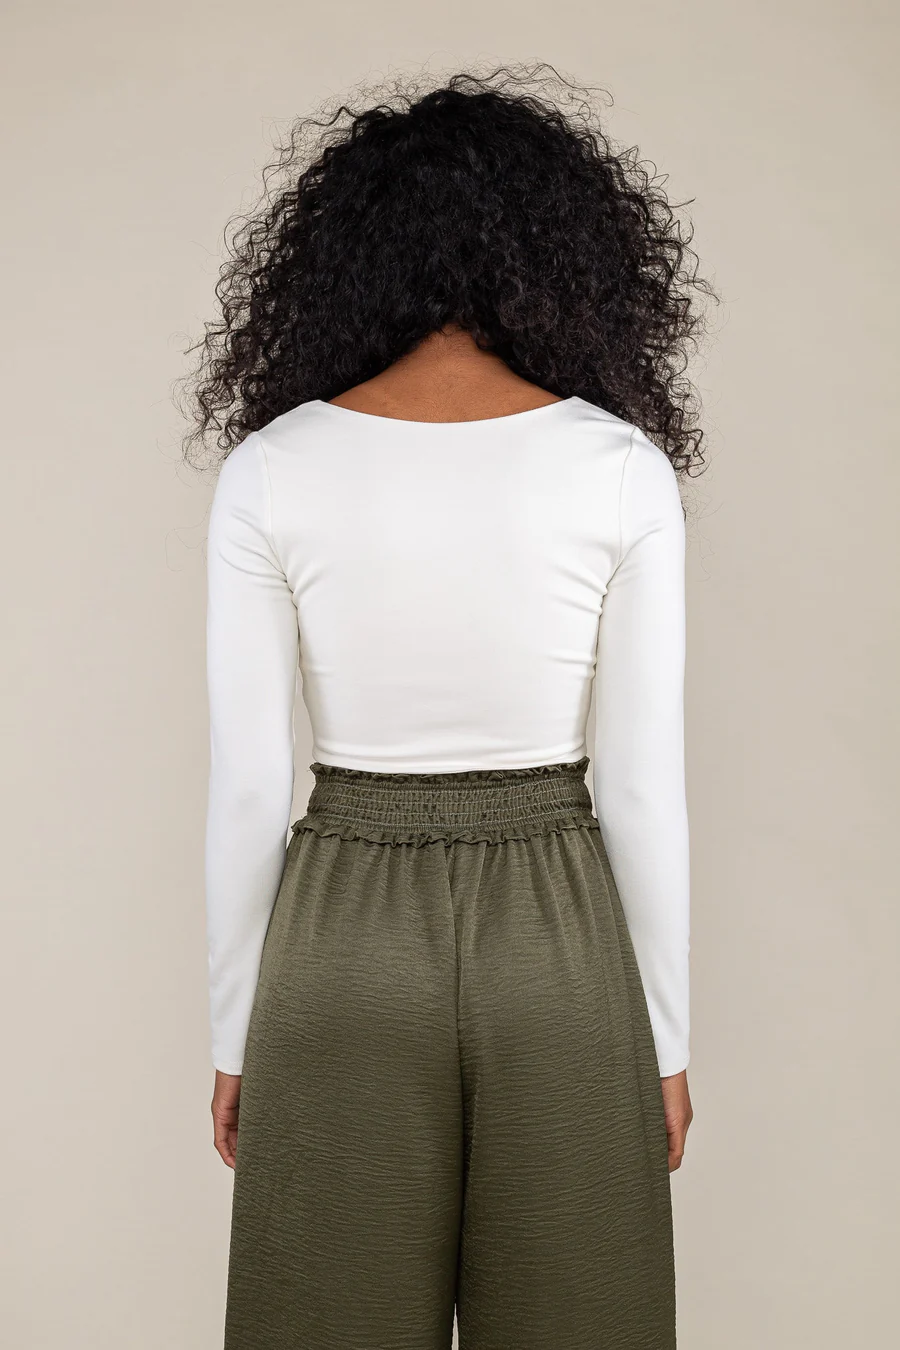 Brooklyn Square Neck Corset Crop Top - Ivory